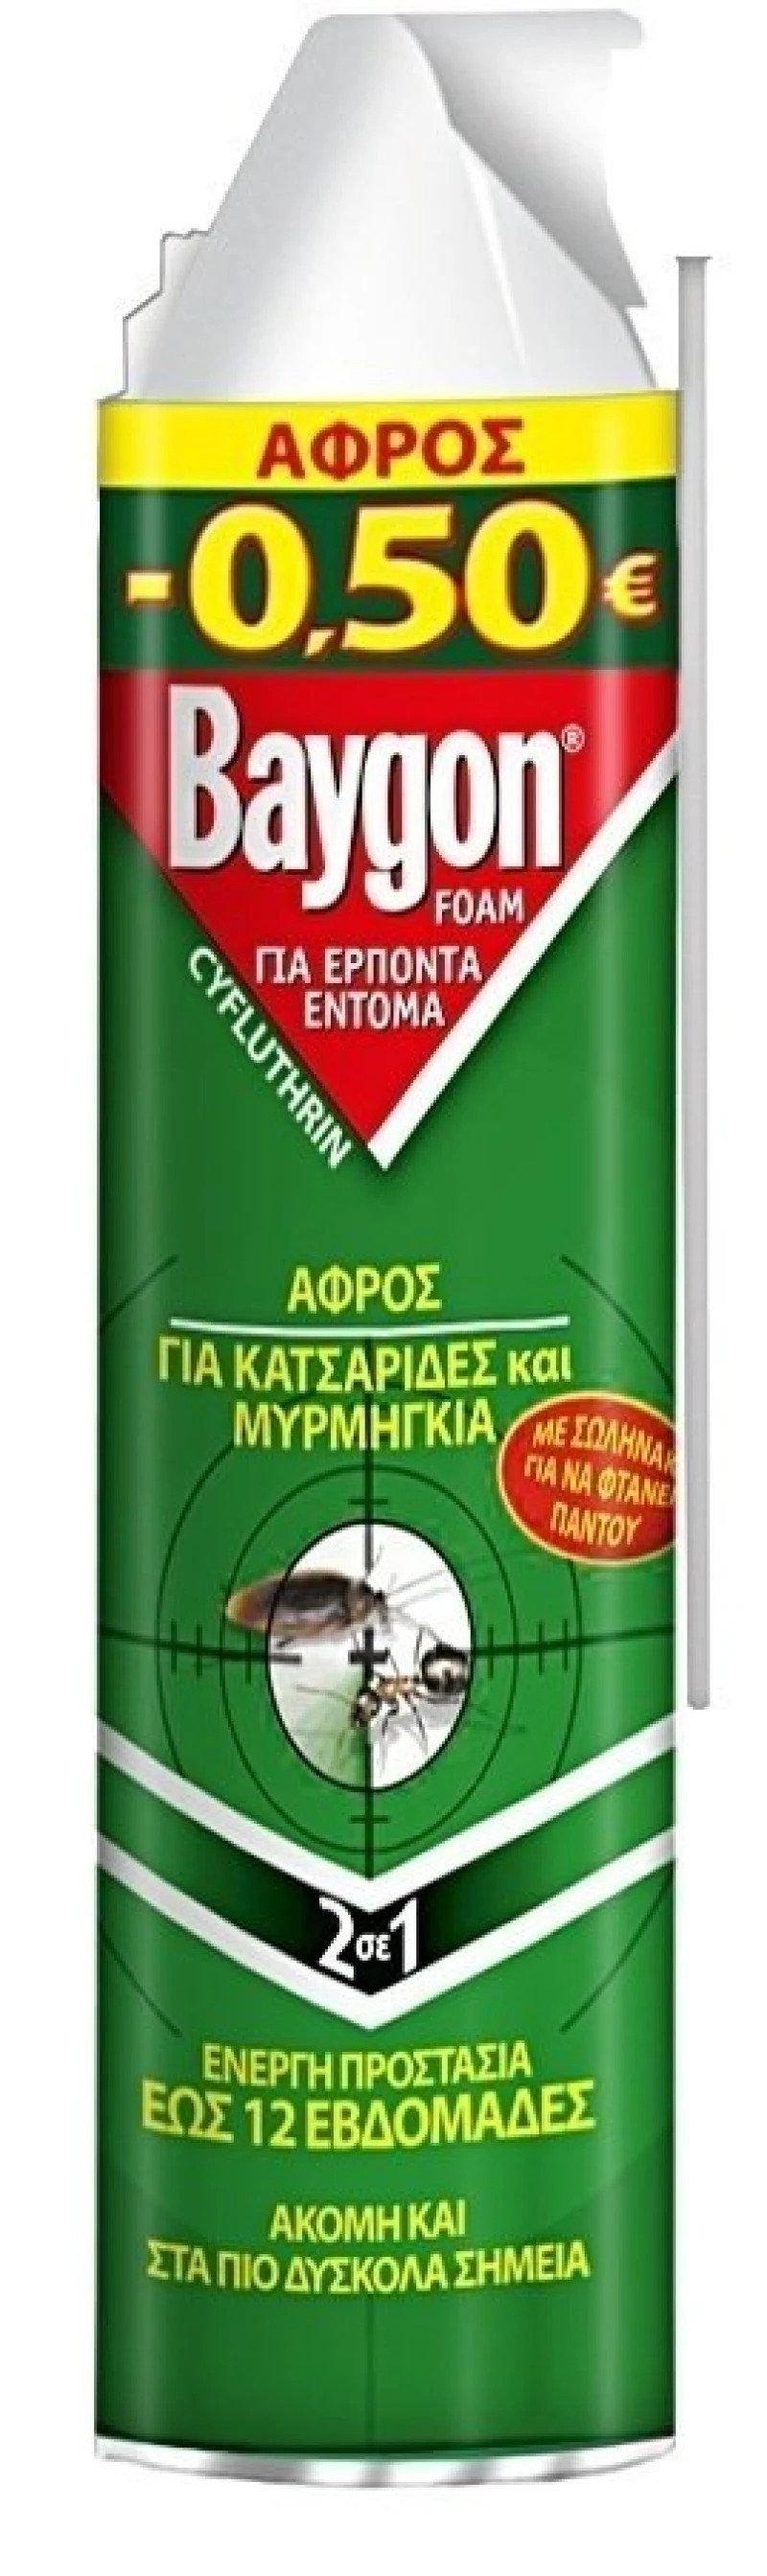 Baygon Foam for Insects 400ml